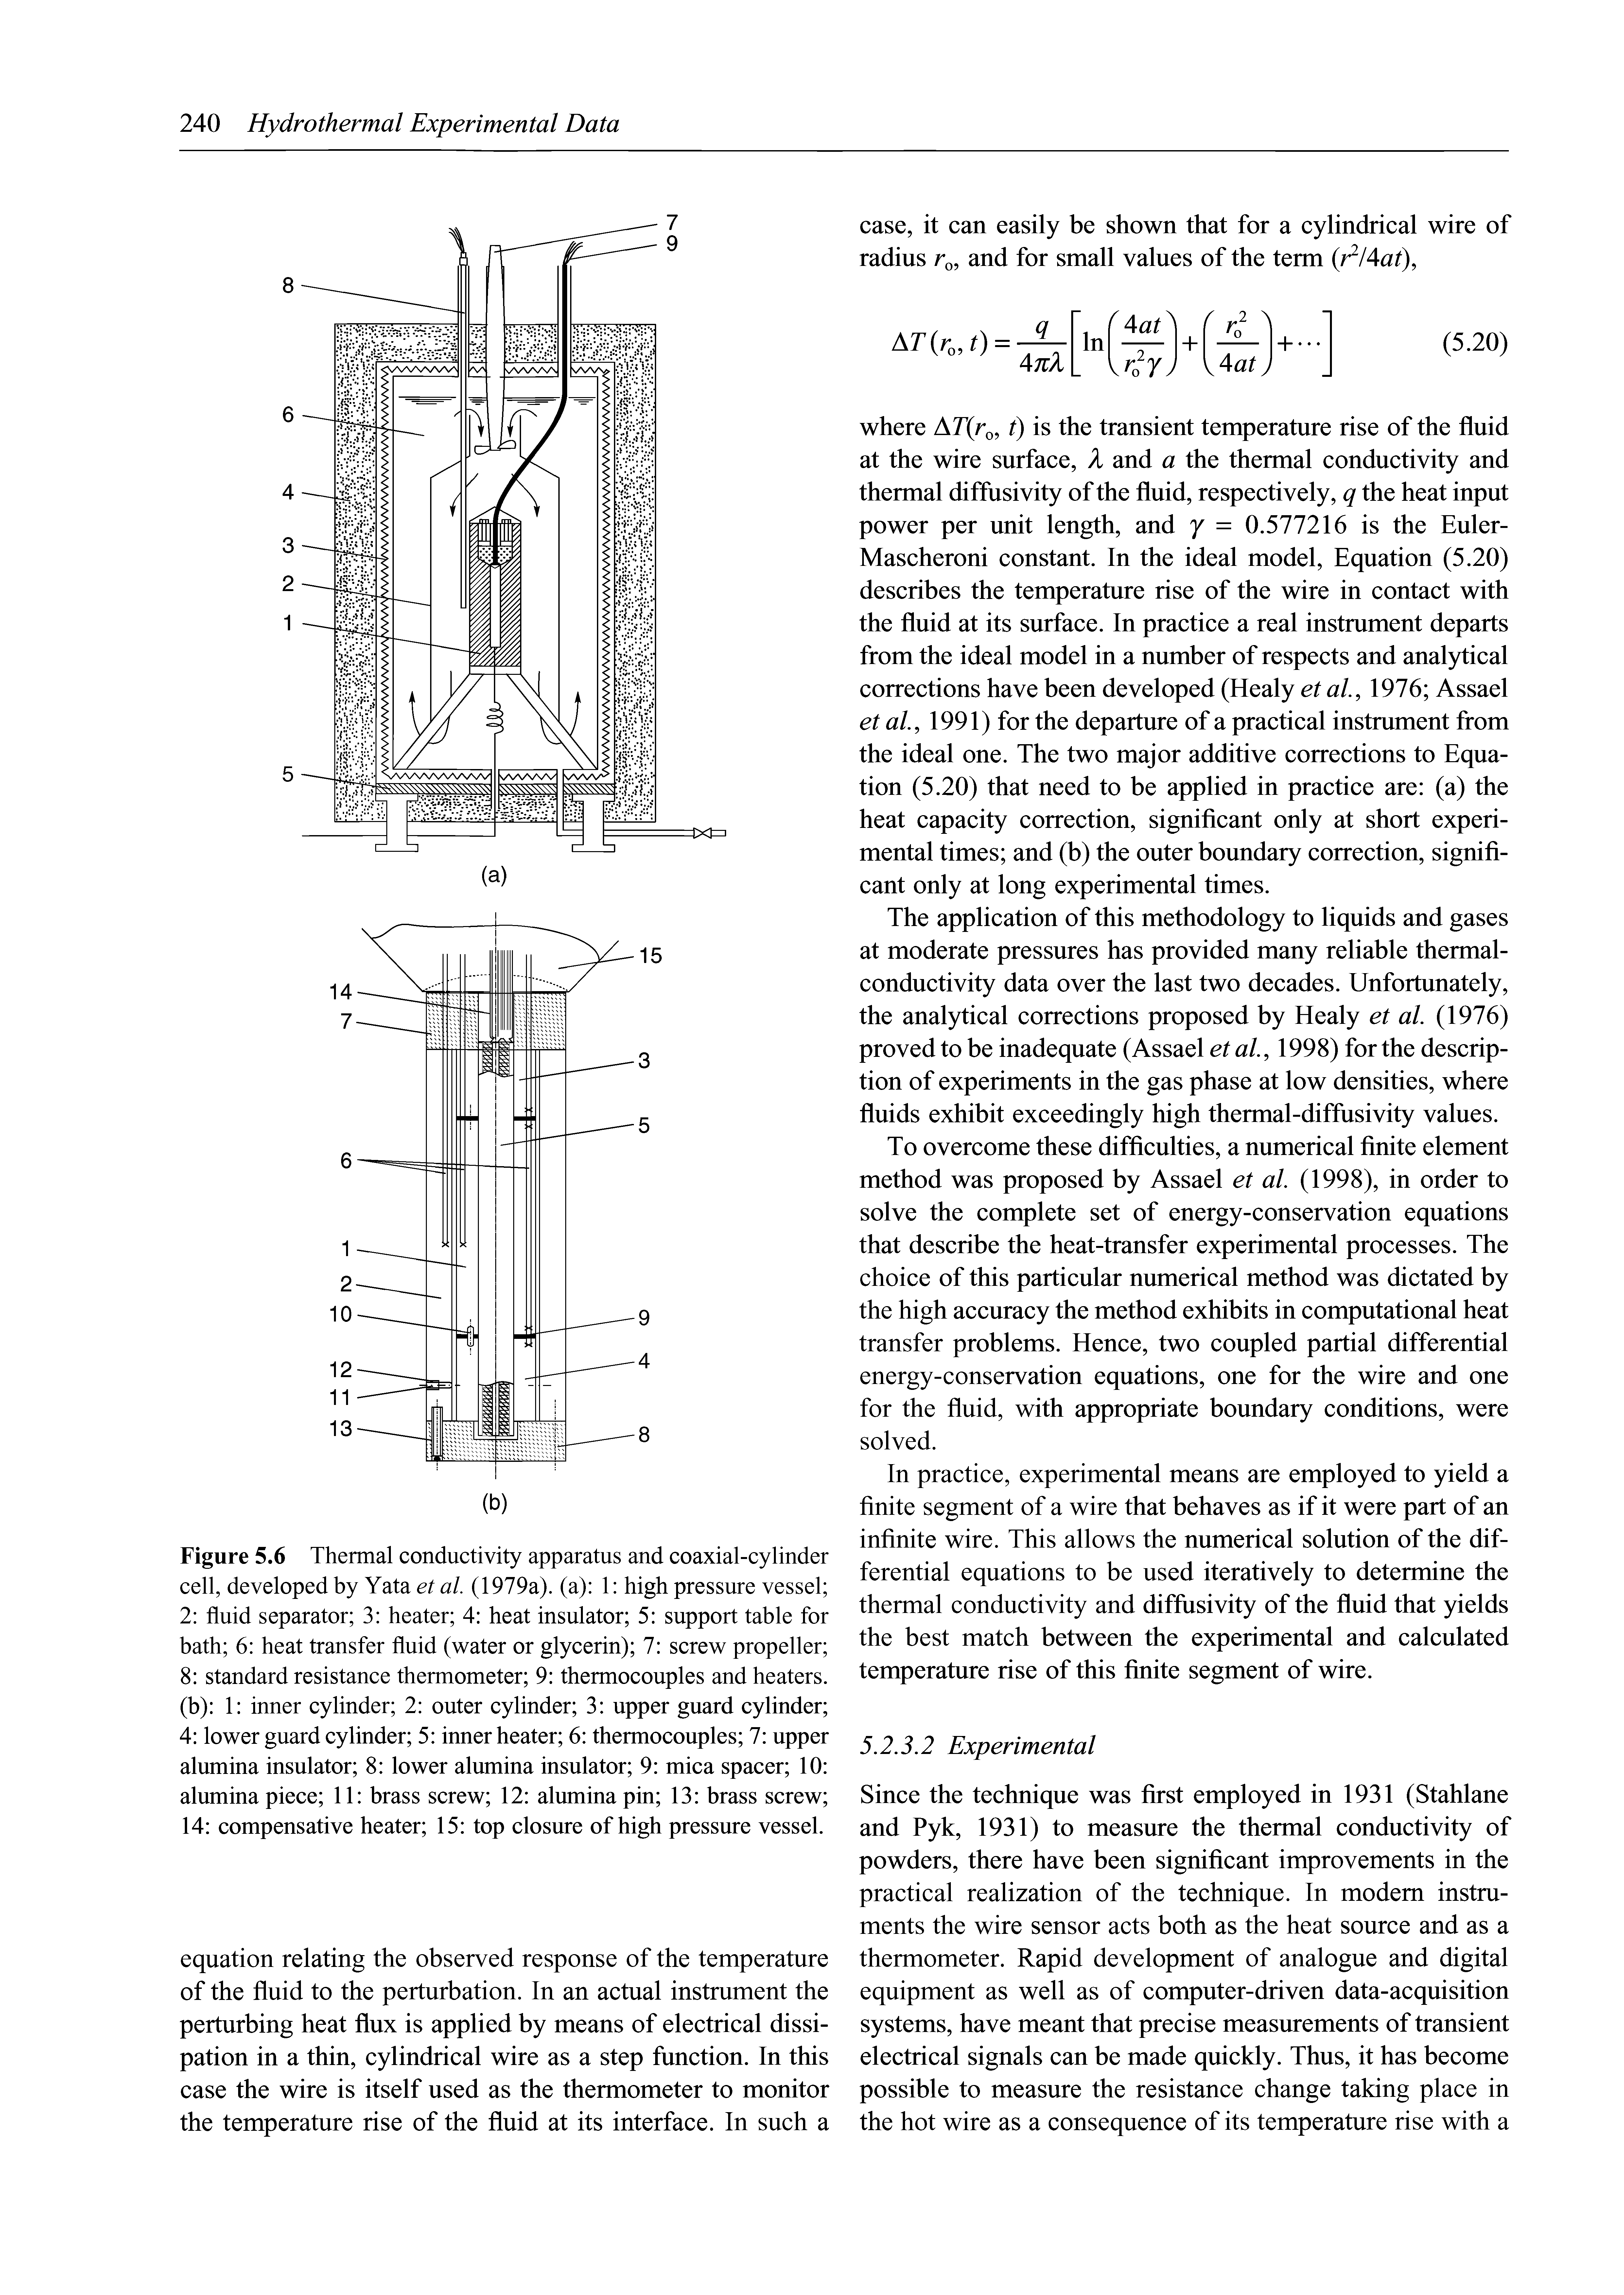 Figure 5.6 Thermal conductivity apparatus and coaxial-cylinder cell, developed by Yata et al (1979a). (a) 1 high pressure vessel 2 fluid separator 3 heater 4 heat insulator 5 support table for bath 6 heat transfer fluid (water or glycerin) 7 screw propeller 8 standard resistance thermometer 9 thermocouples and heaters, (b) 1 inner cylinder 2 outer cylinder 3 upper guard cylinder 4 lower guard cylinder 5 inner heater 6 thermocouples 7 upper alumina insulator 8 lower alumina insulator 9 mica spacer 10 alumina piece 11 brass screw 12 alumina pin 13 brass screw 14 compensative heater 15 top closure of high pressure vessel.